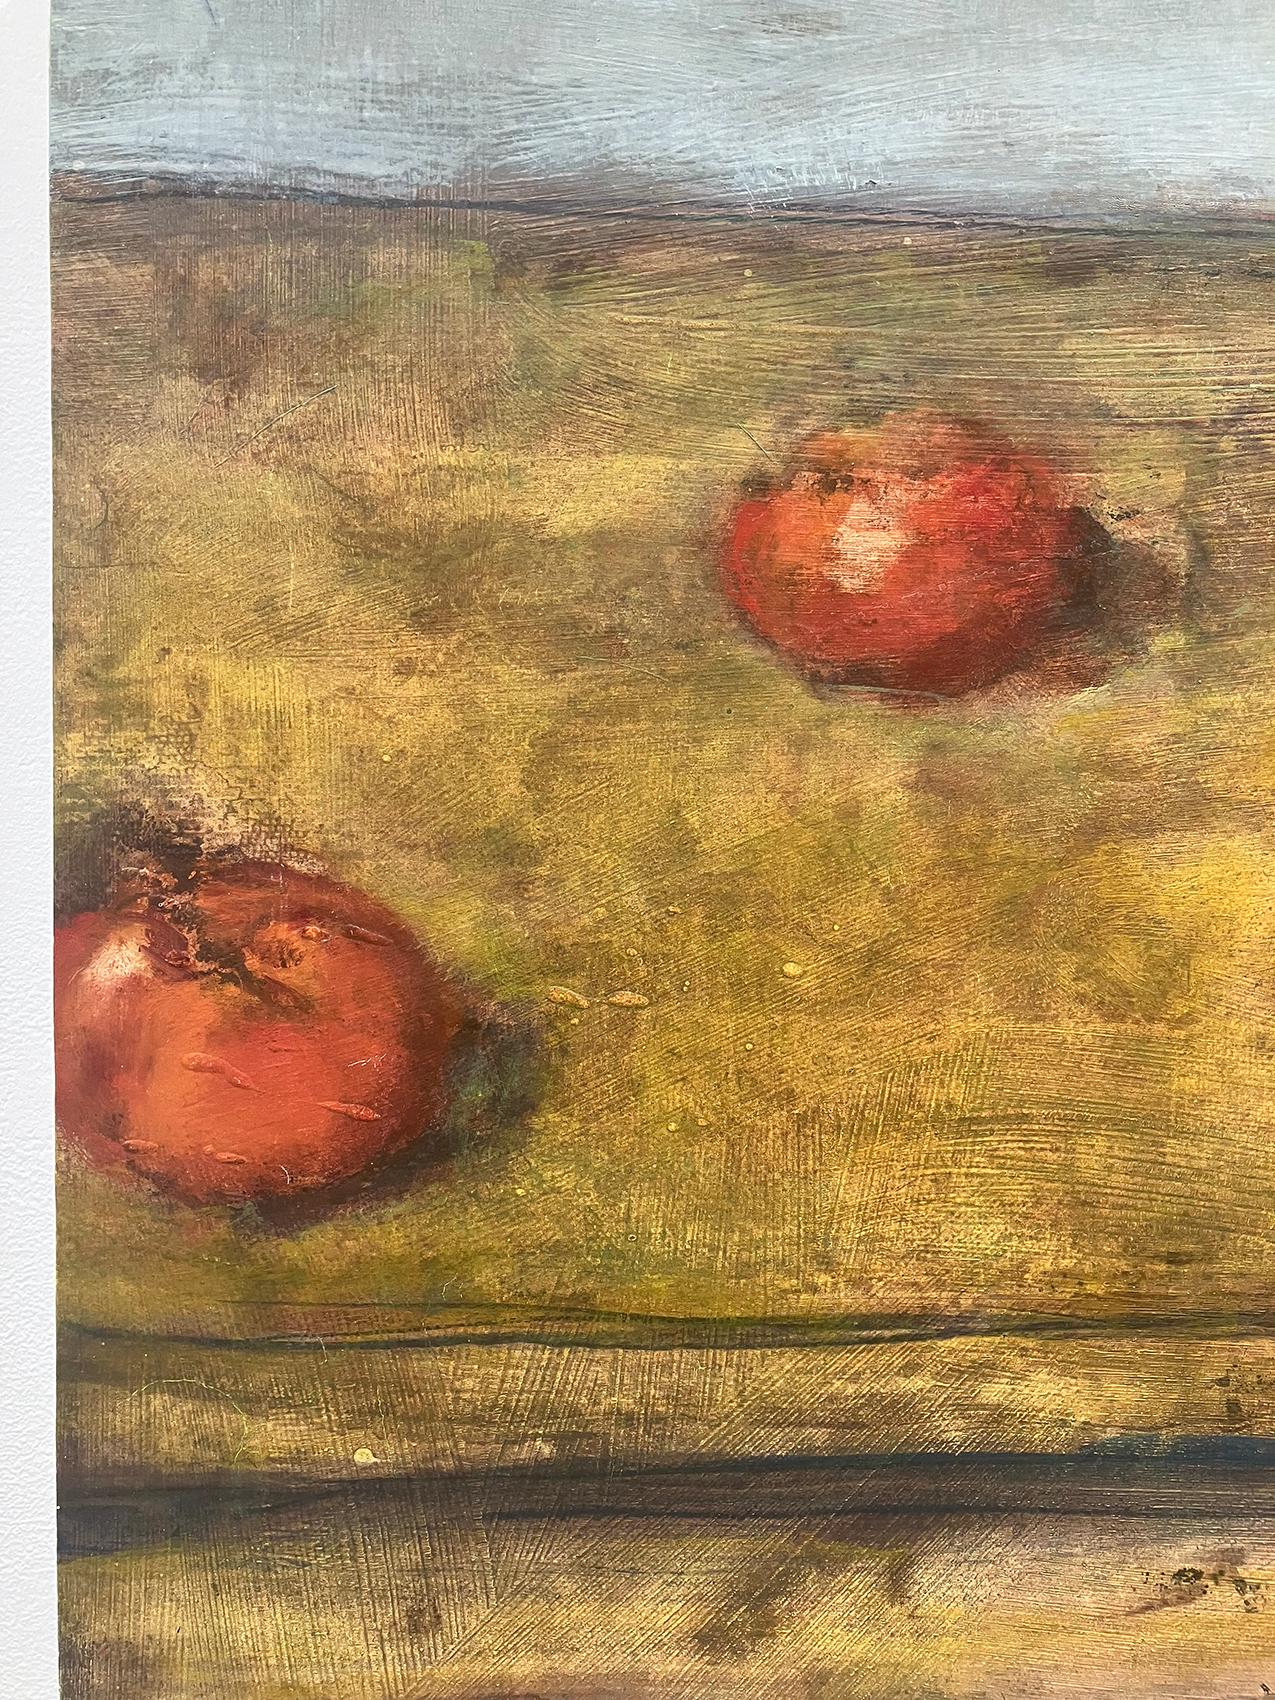 Impressionist still life painting on panel of red tomatoes on a rustic wood table with a pale blue background
